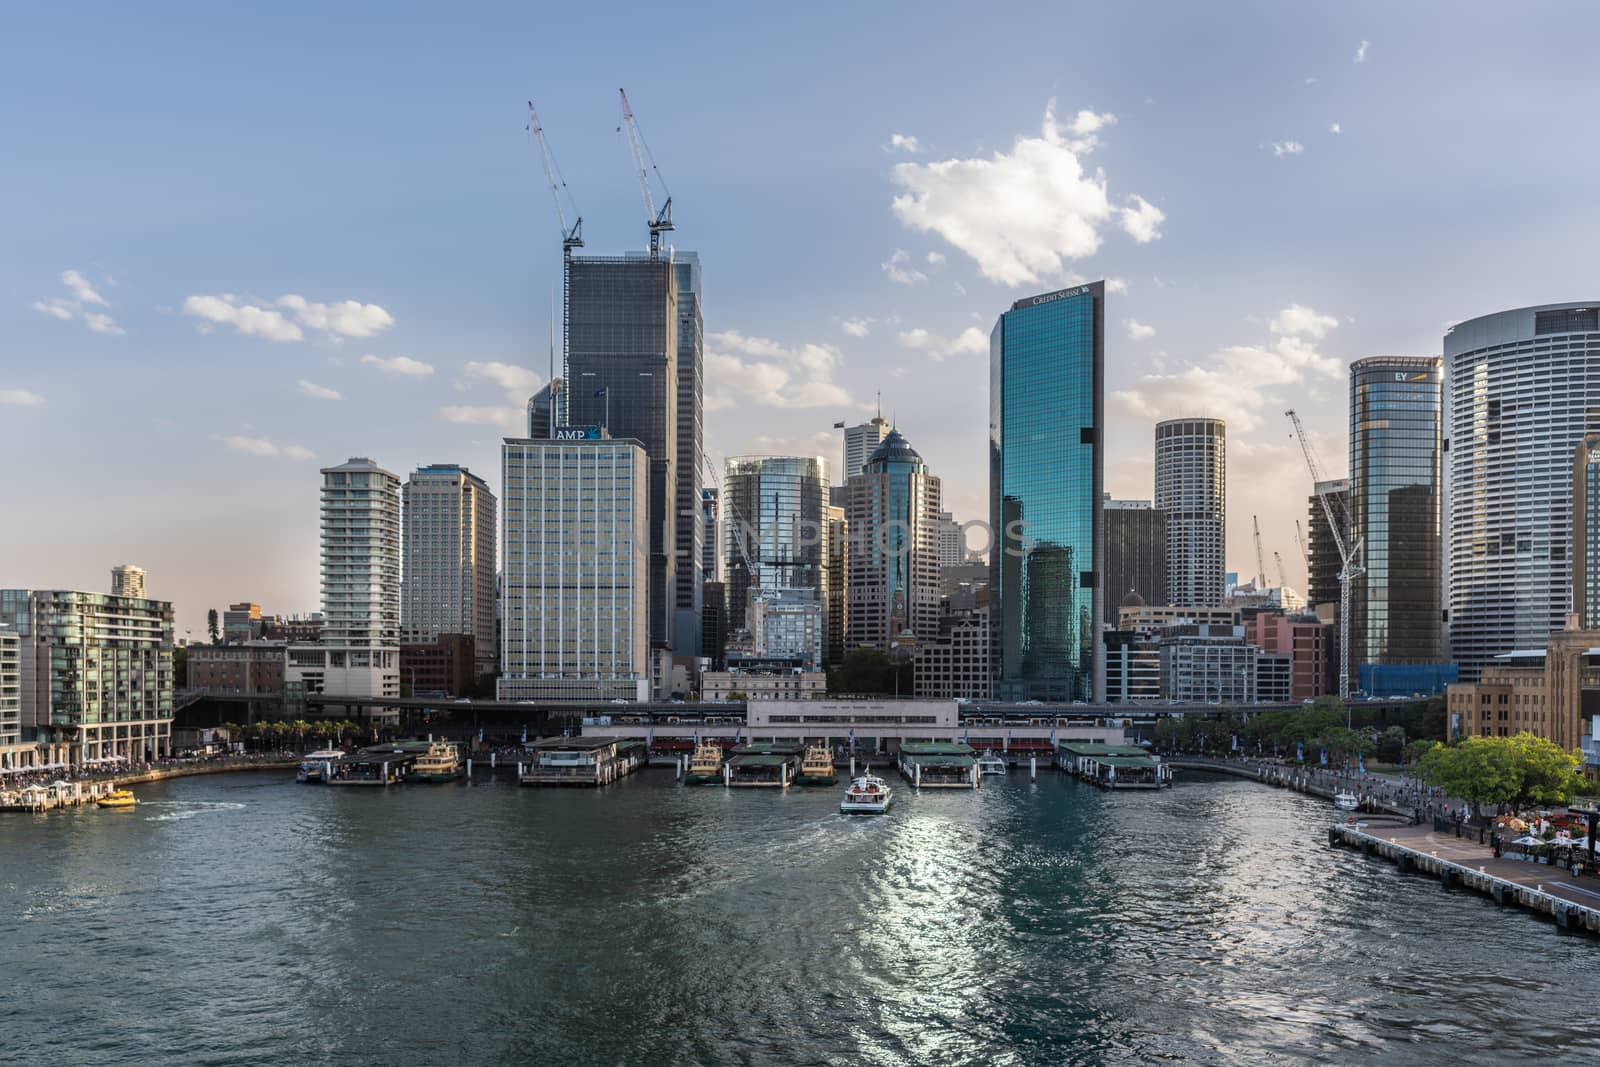 Sydney, Australia - February 12, 2019: Ferry terminal and Circular Quay Railway Station plus skyline in back. Highrises under construction with cranes. First Fleet Park green. Evening shot with light blue sky.